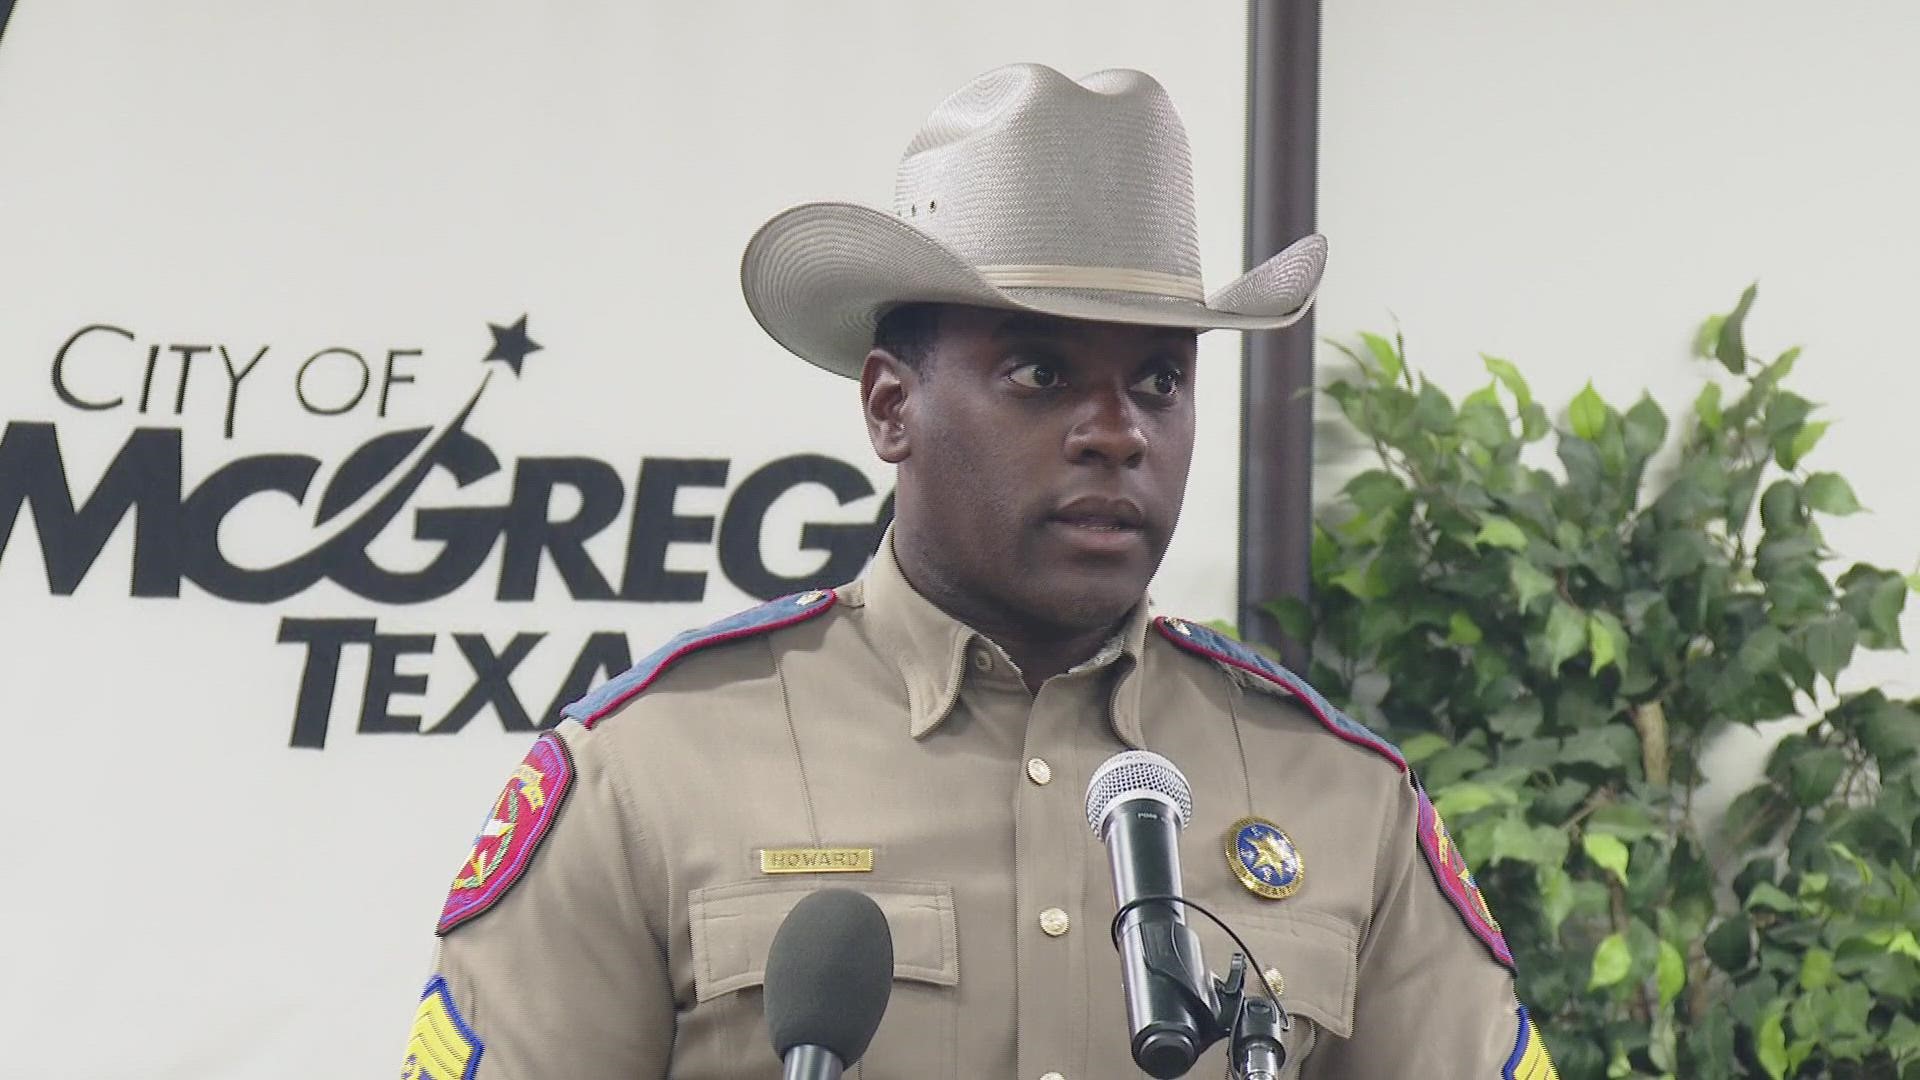 A sergeant with DPS said Texas Rangers were leading the investigation that included an officer involved shooting.